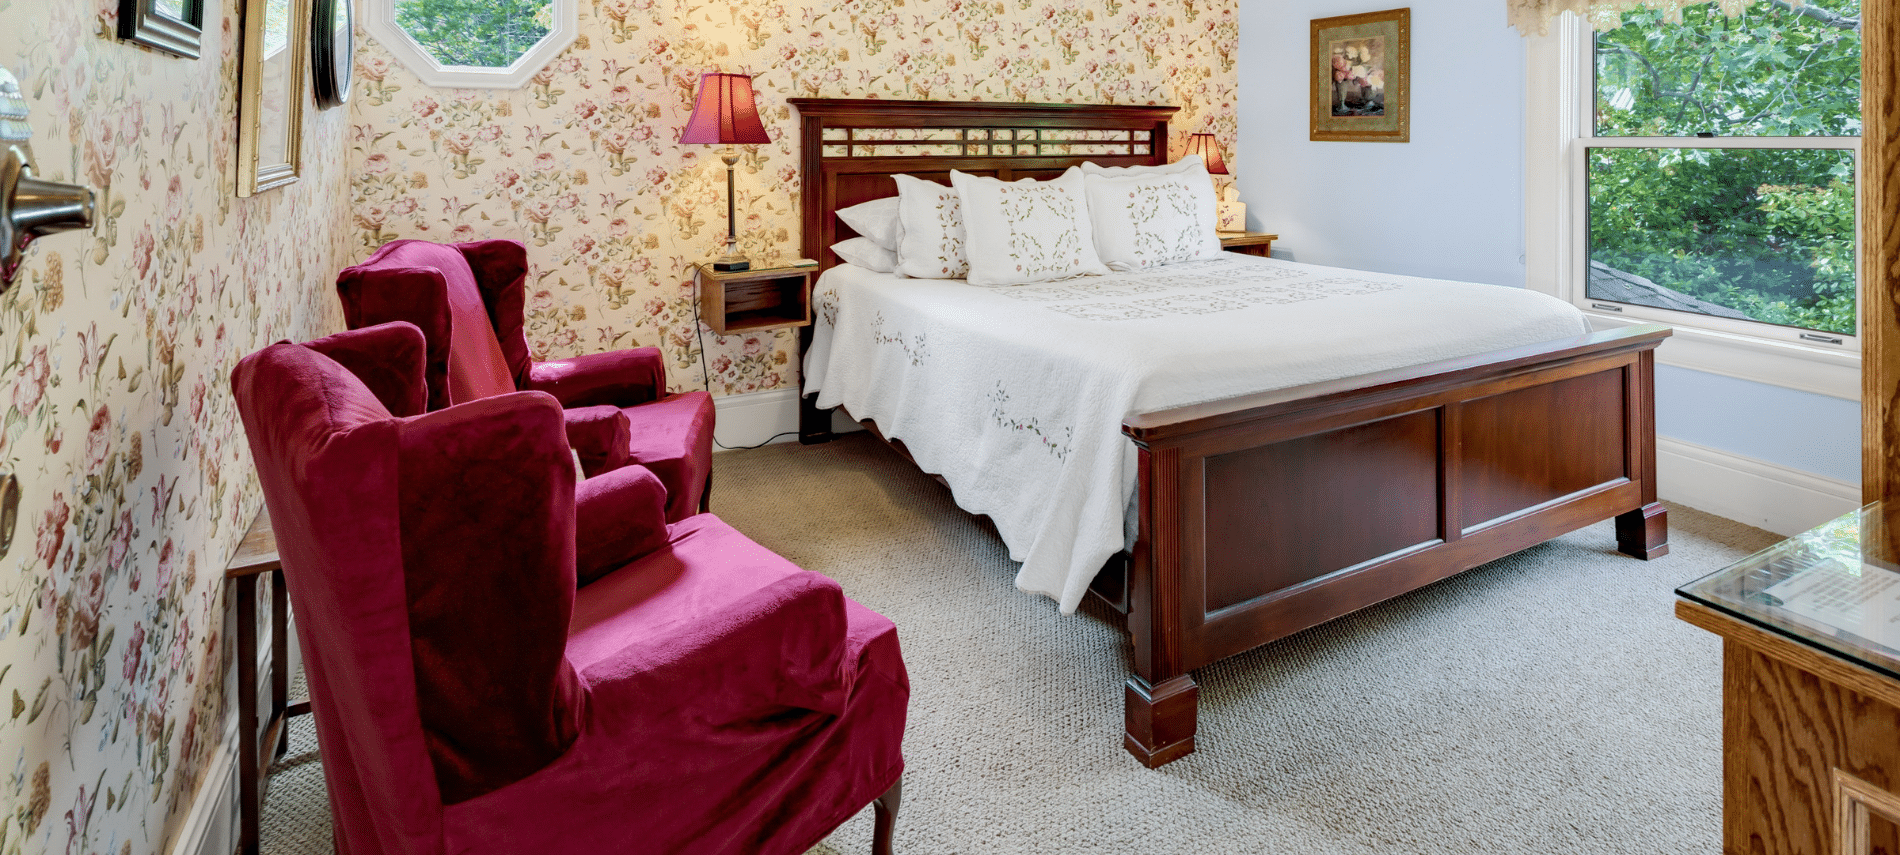 Abigail Adams with its King Bed and Bathroom en suite